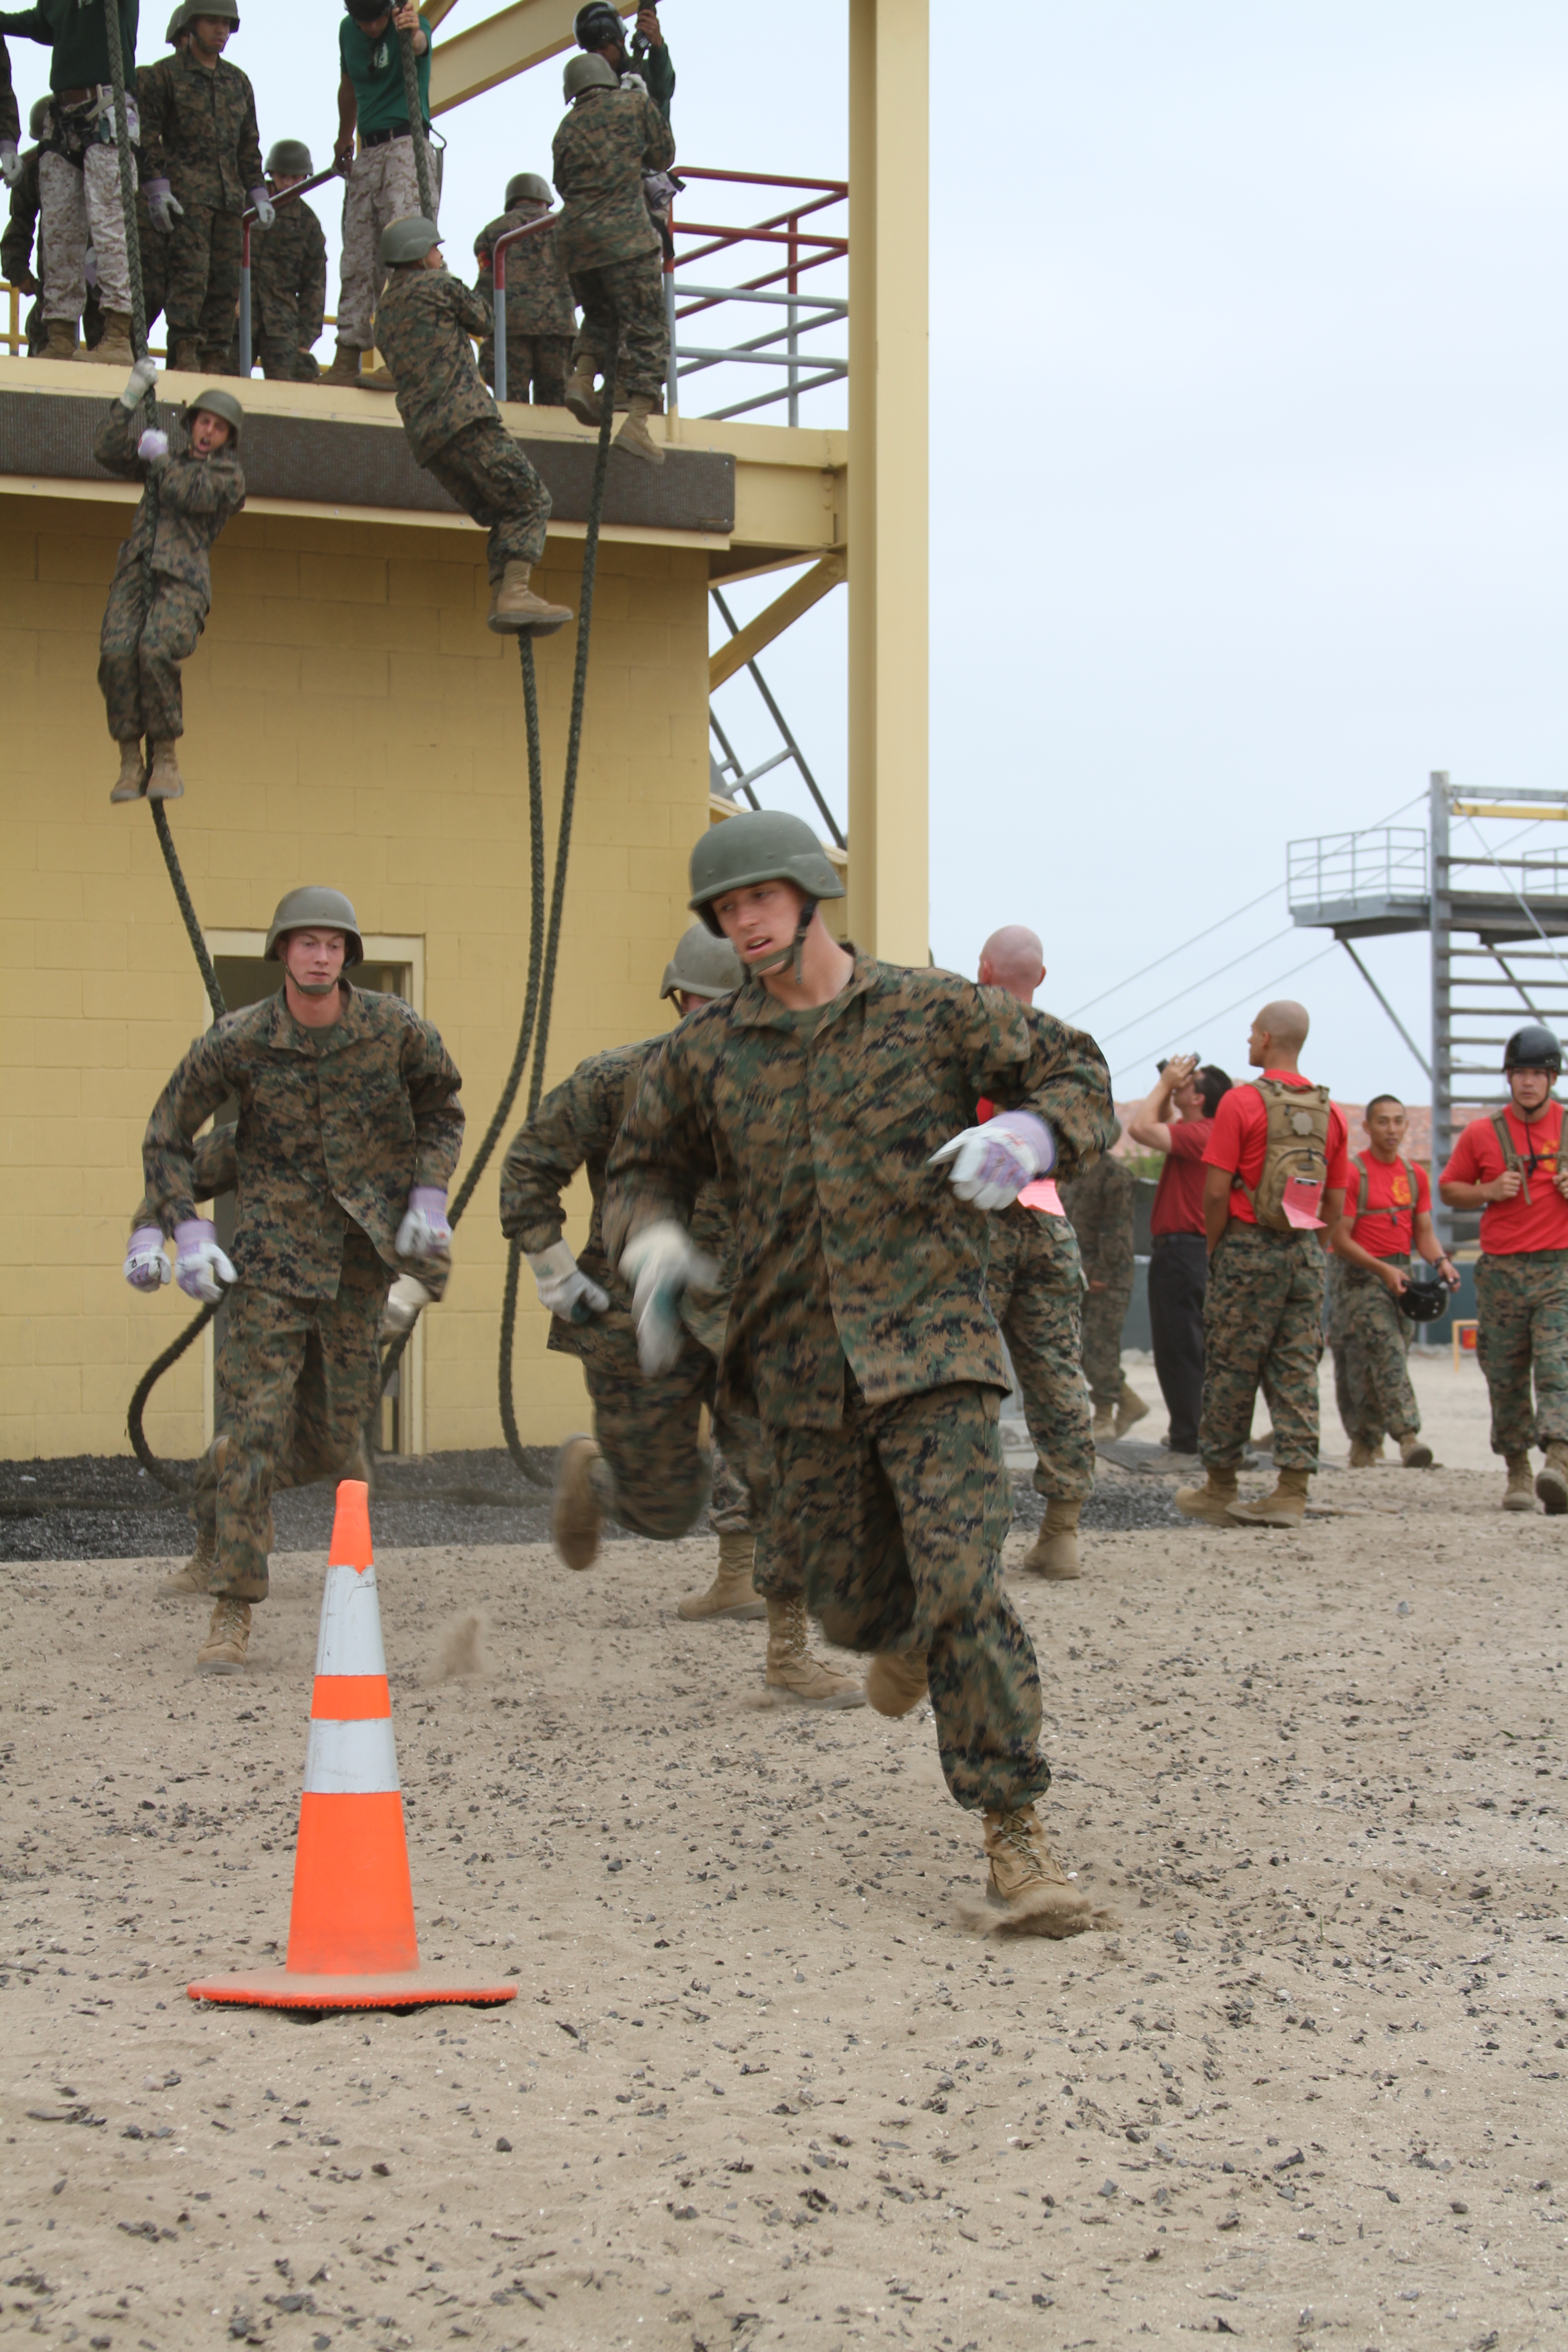 Company C recruits tower over MCRD > Marine Corps Training and